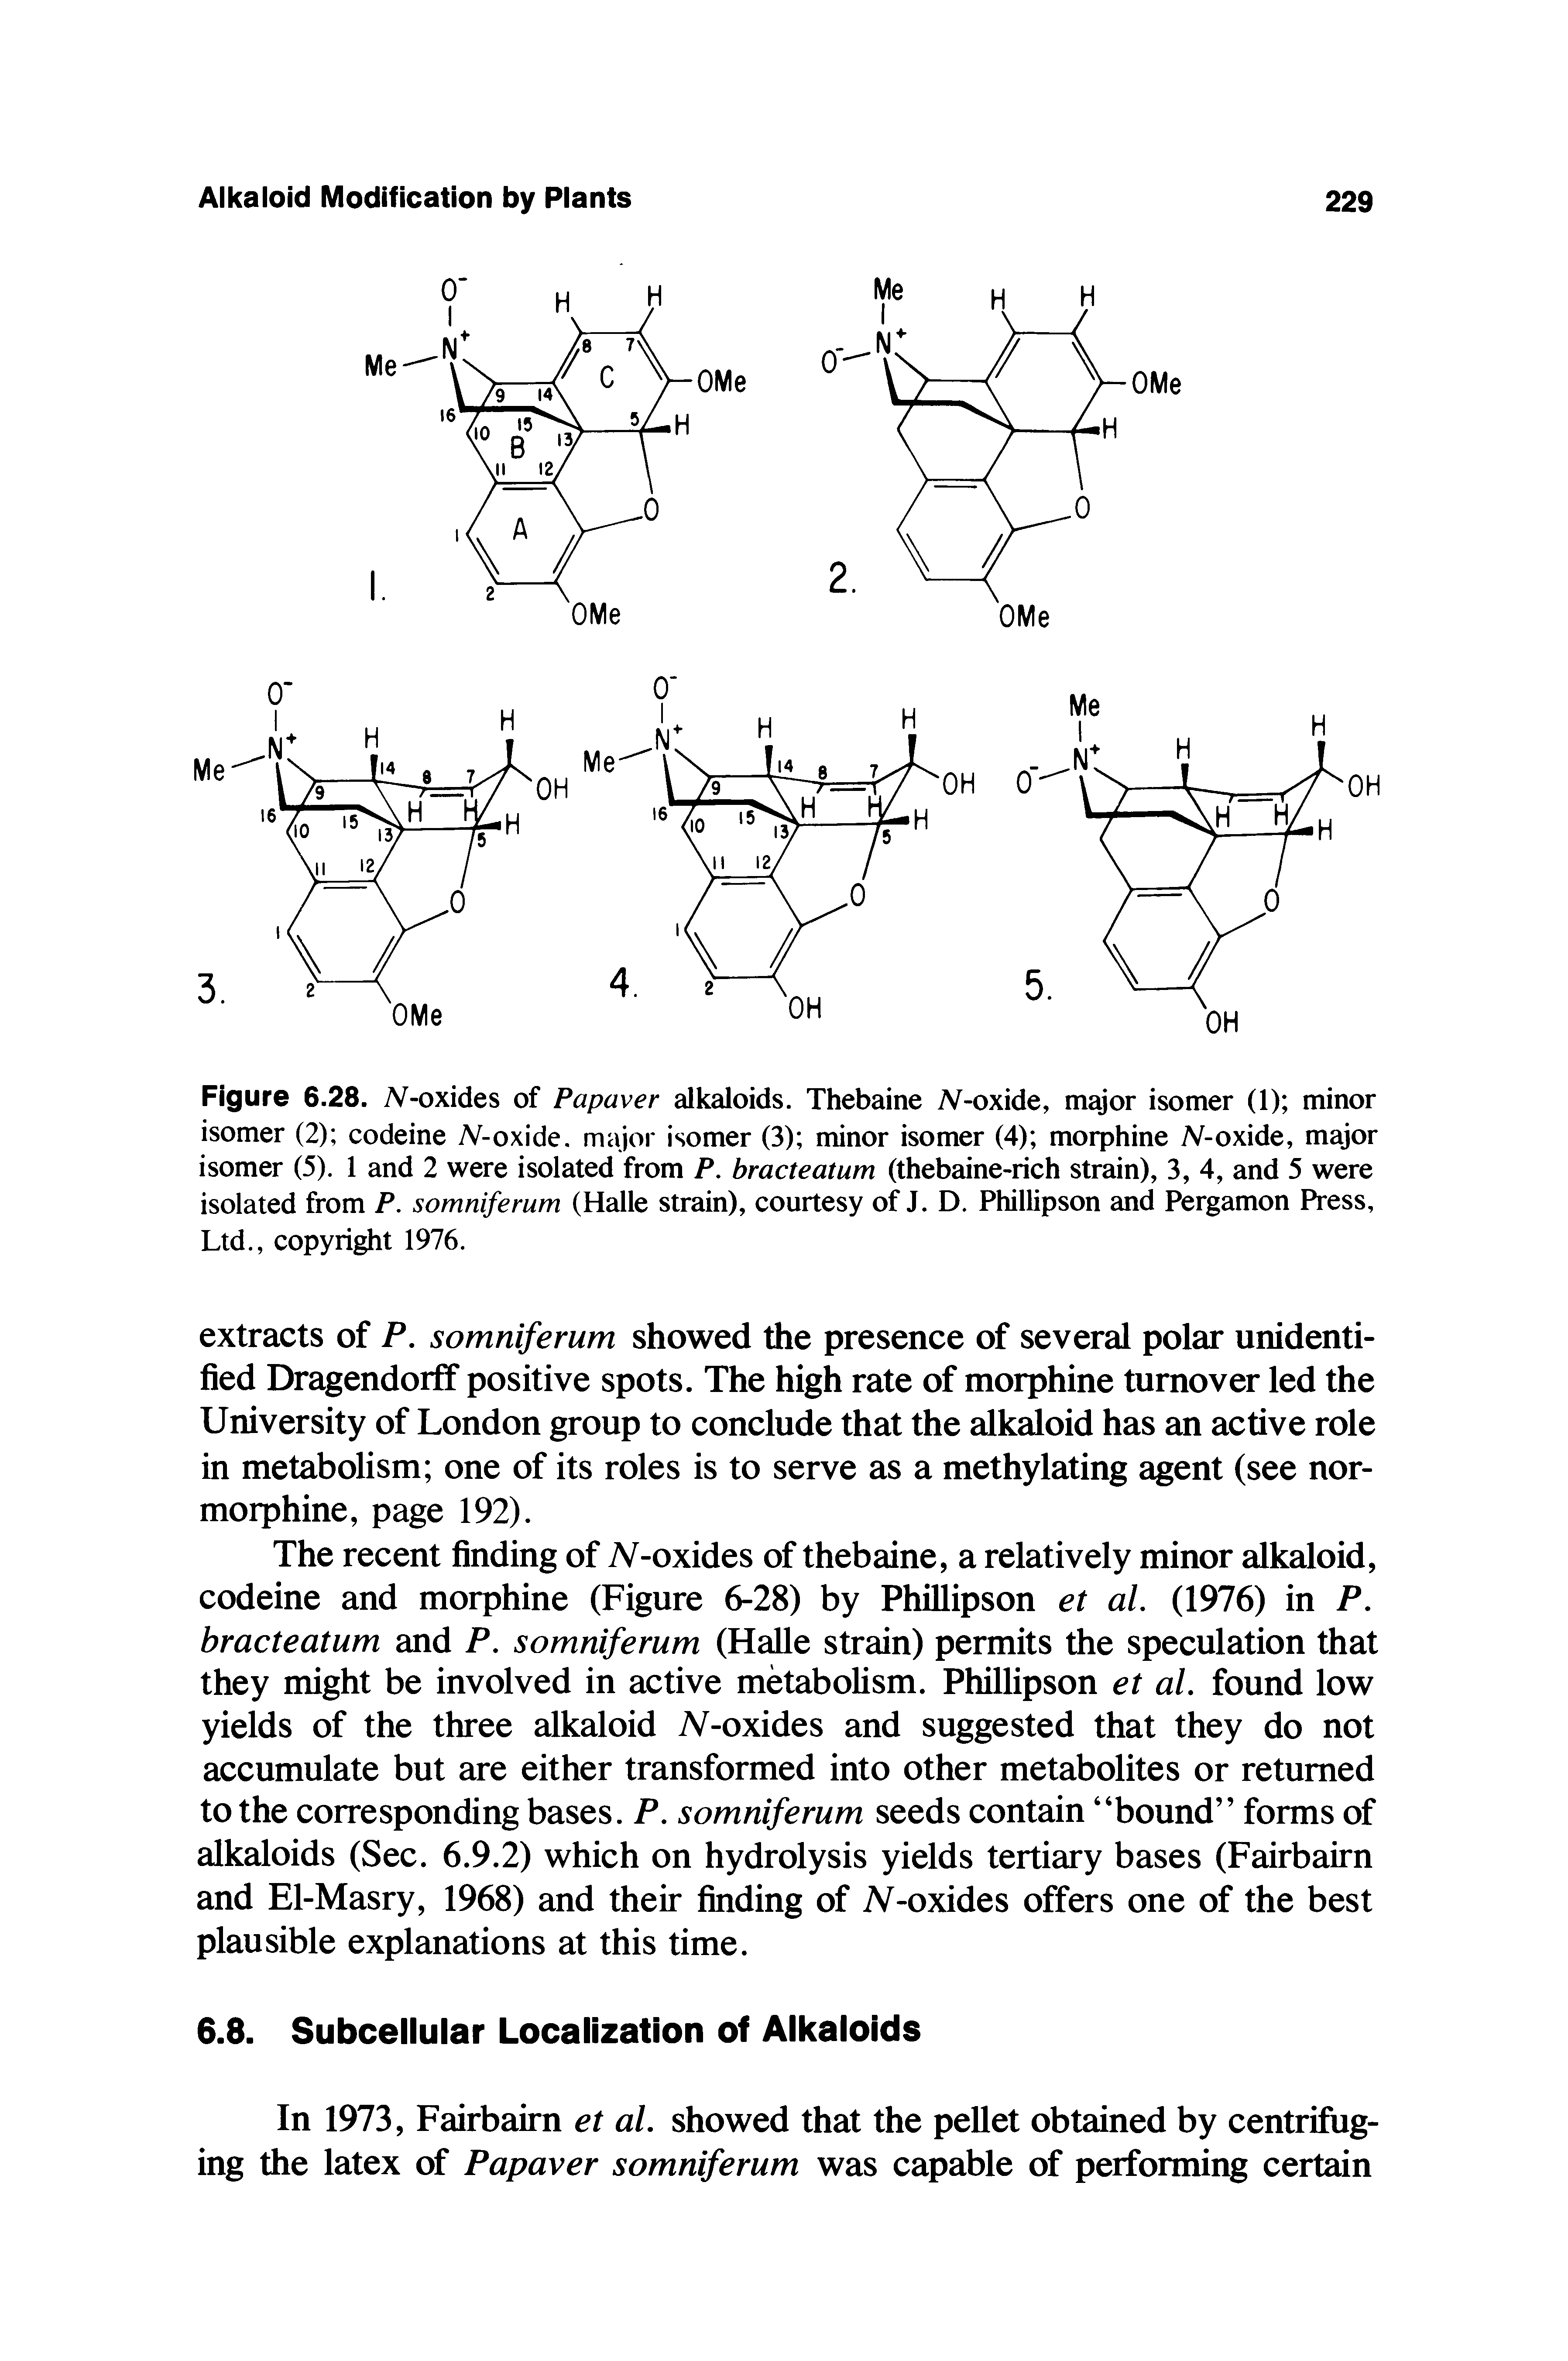 Figure 6.28. N-oxides of Papaver alkaloids. Thebaine N-oxide, major isomer (1) minor isomer (2) codeine A -oxide. major isomer (3) minor isomer (4) morphine N-oxide, major isomer (5). 1 and 2 were isolated from P. bracteatum (thebaine-rich strain), 3, 4, and 5 were isolated from P. somniferum (Halle strain), courtesy of J. D. Phillipson and Pergamon Press, Ltd., copyright 1976.